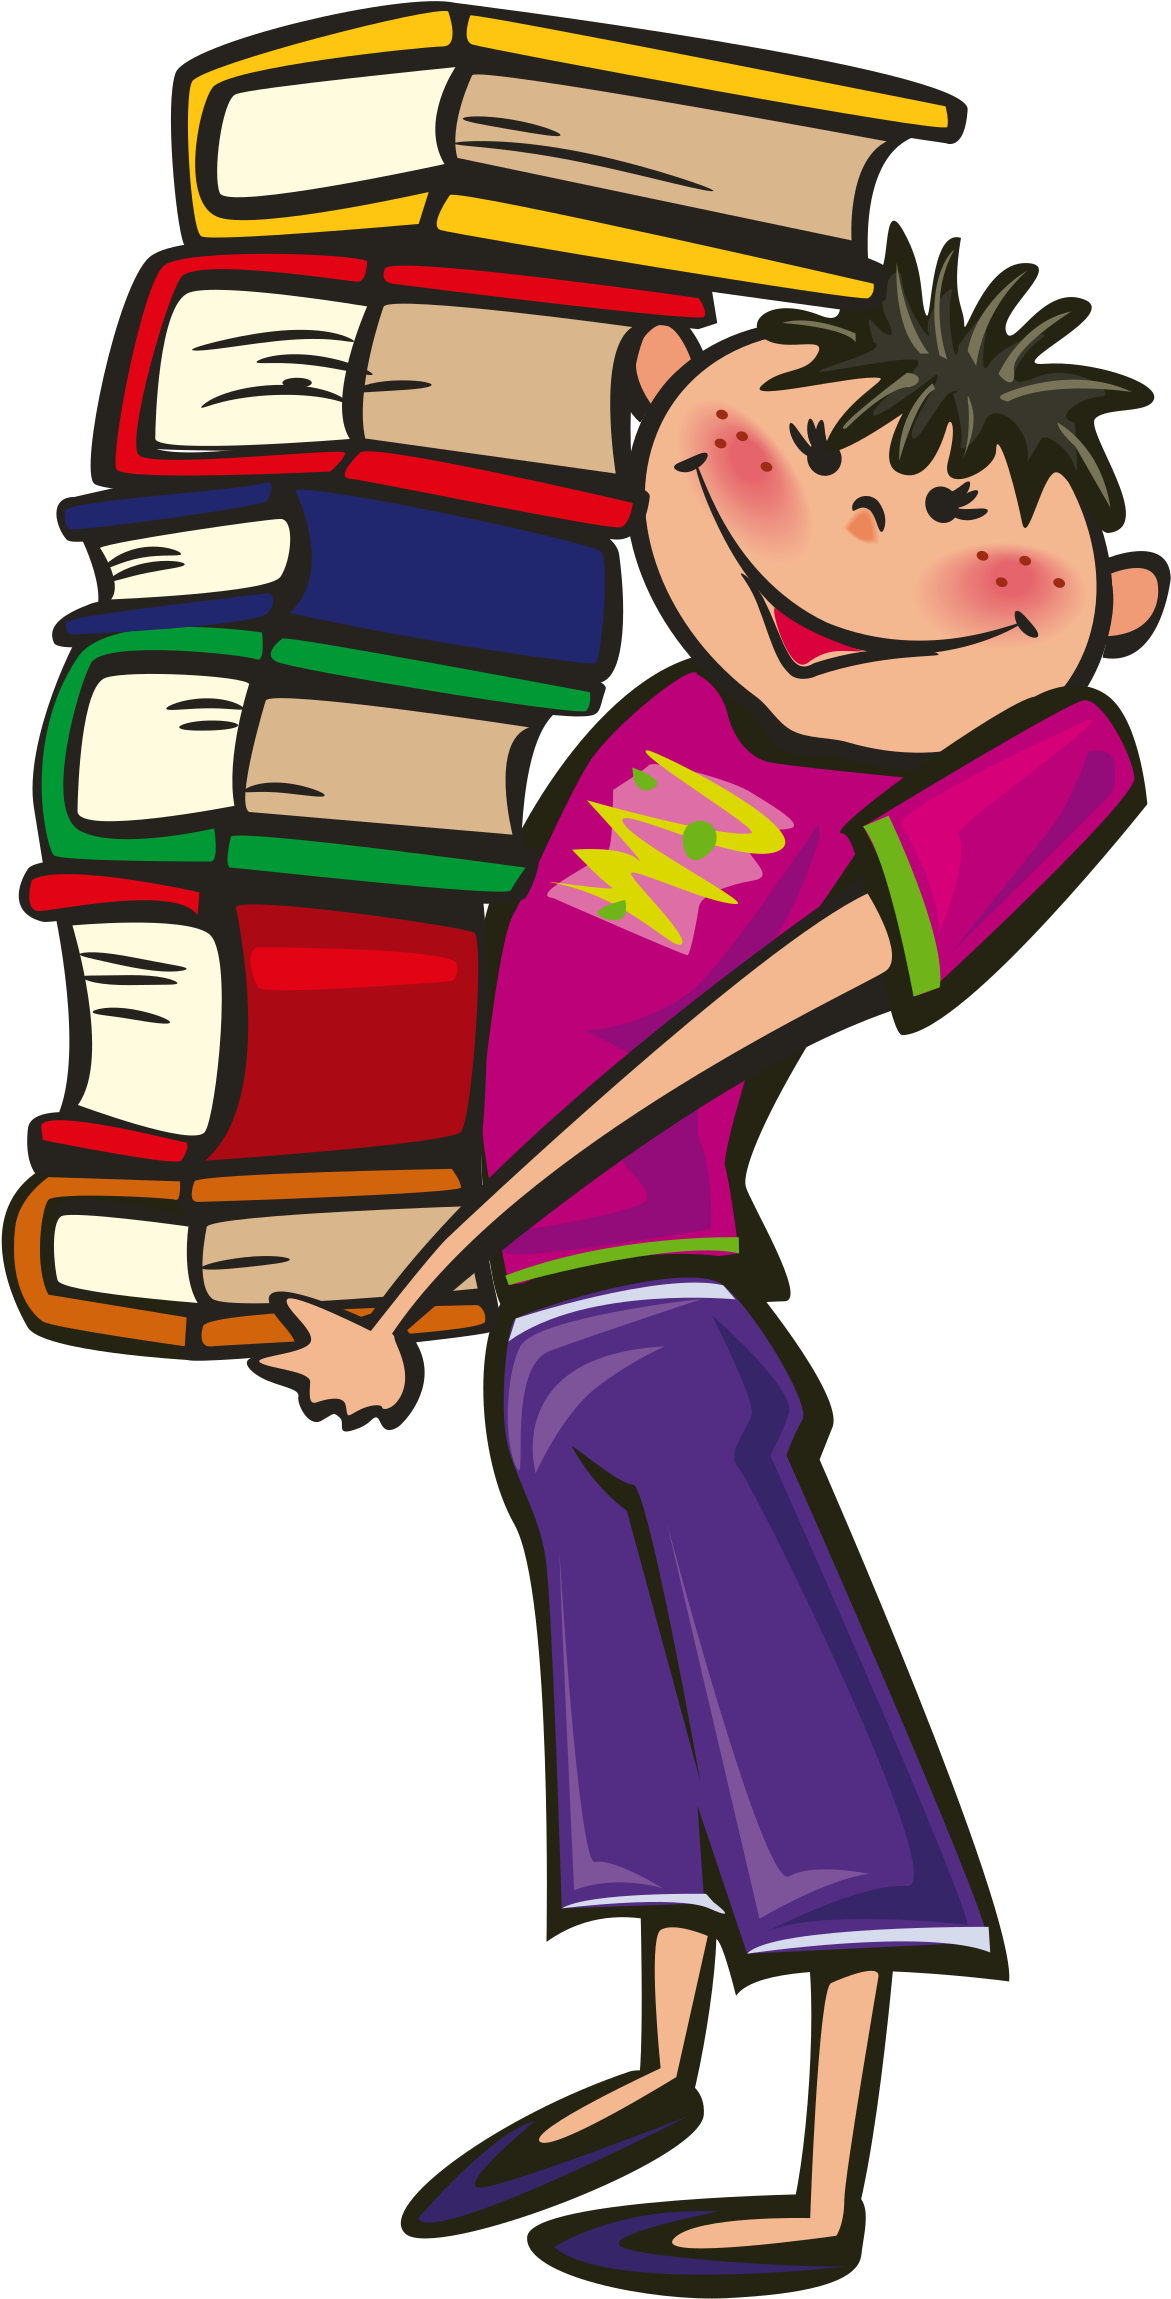 Big Image - Student Carrying Books Clipart (1697x2400)